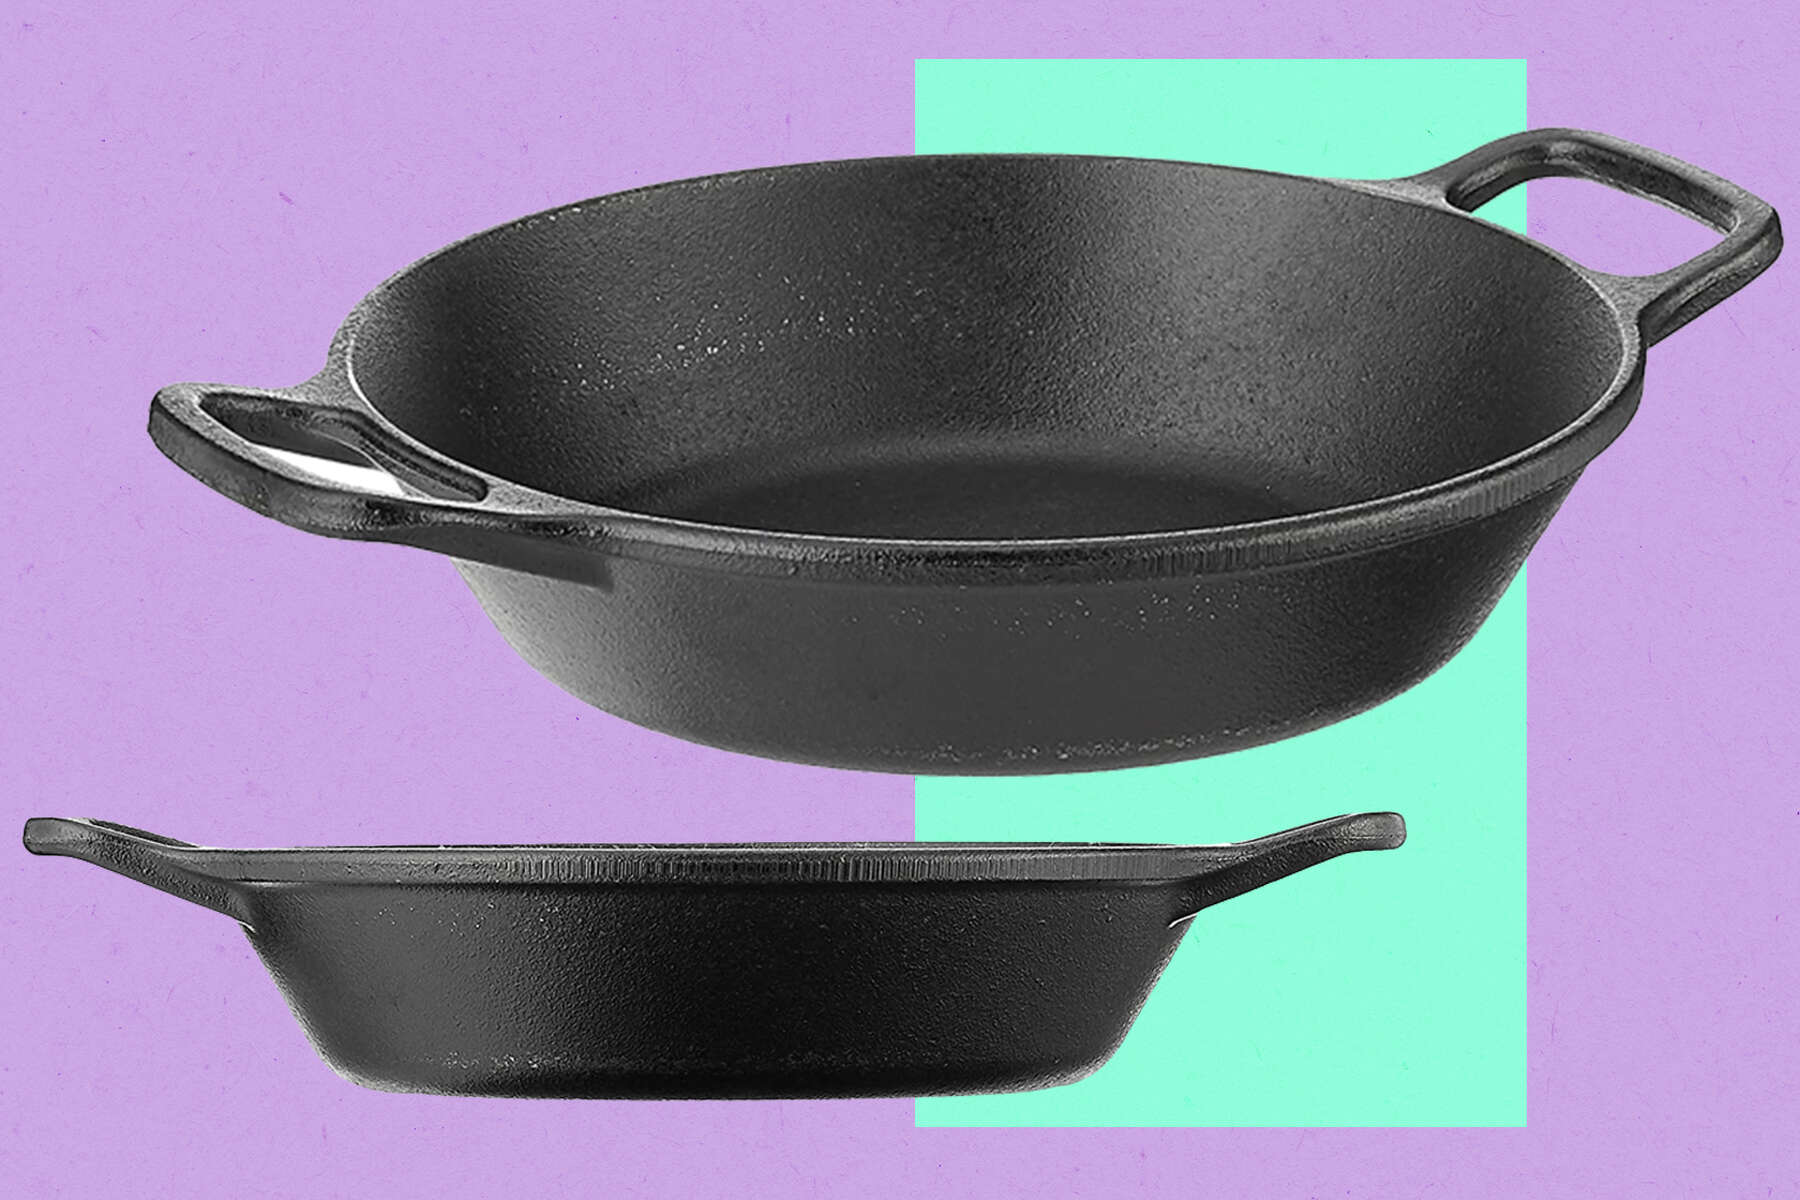 This 8-inch Lodge cast iron pan will only set you back $13